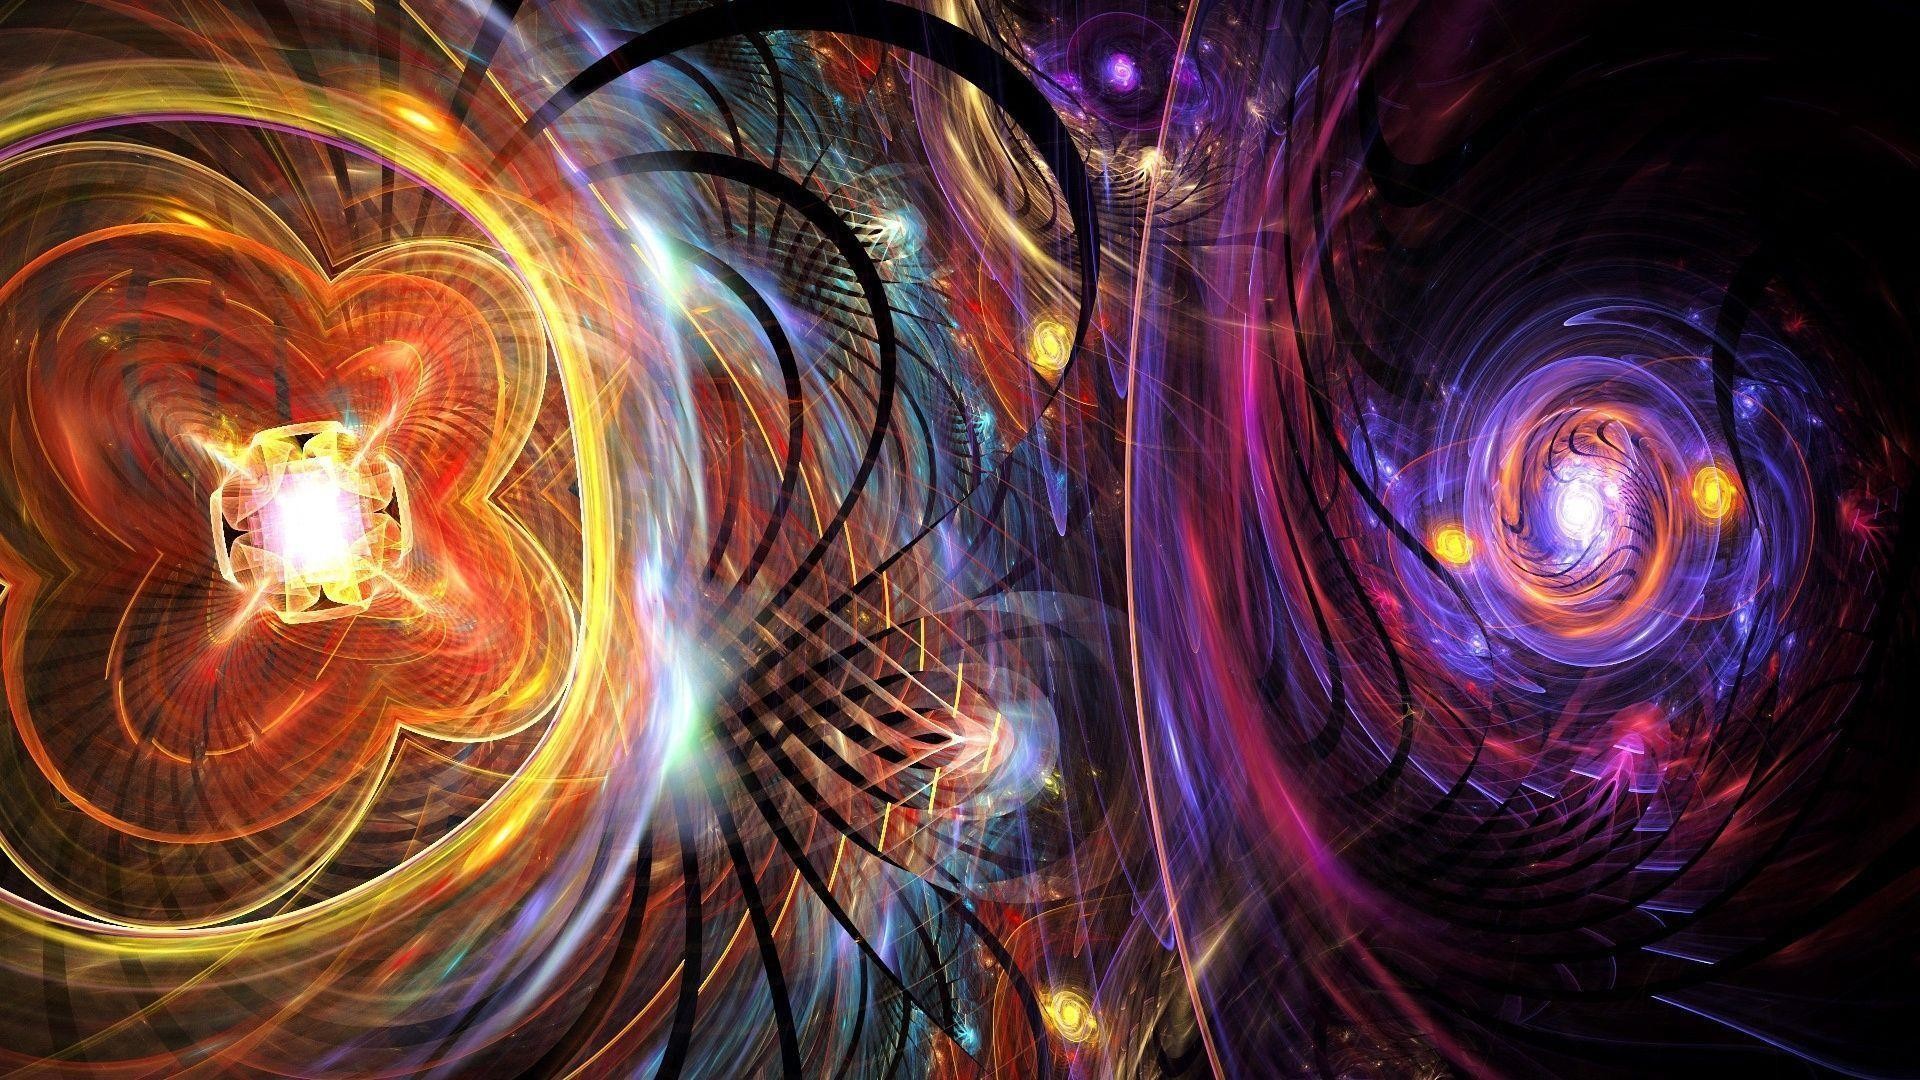 1920x1080 Trippy Hd Space Wallpapers: Hd Trippy Space Wallpapers Viewing .